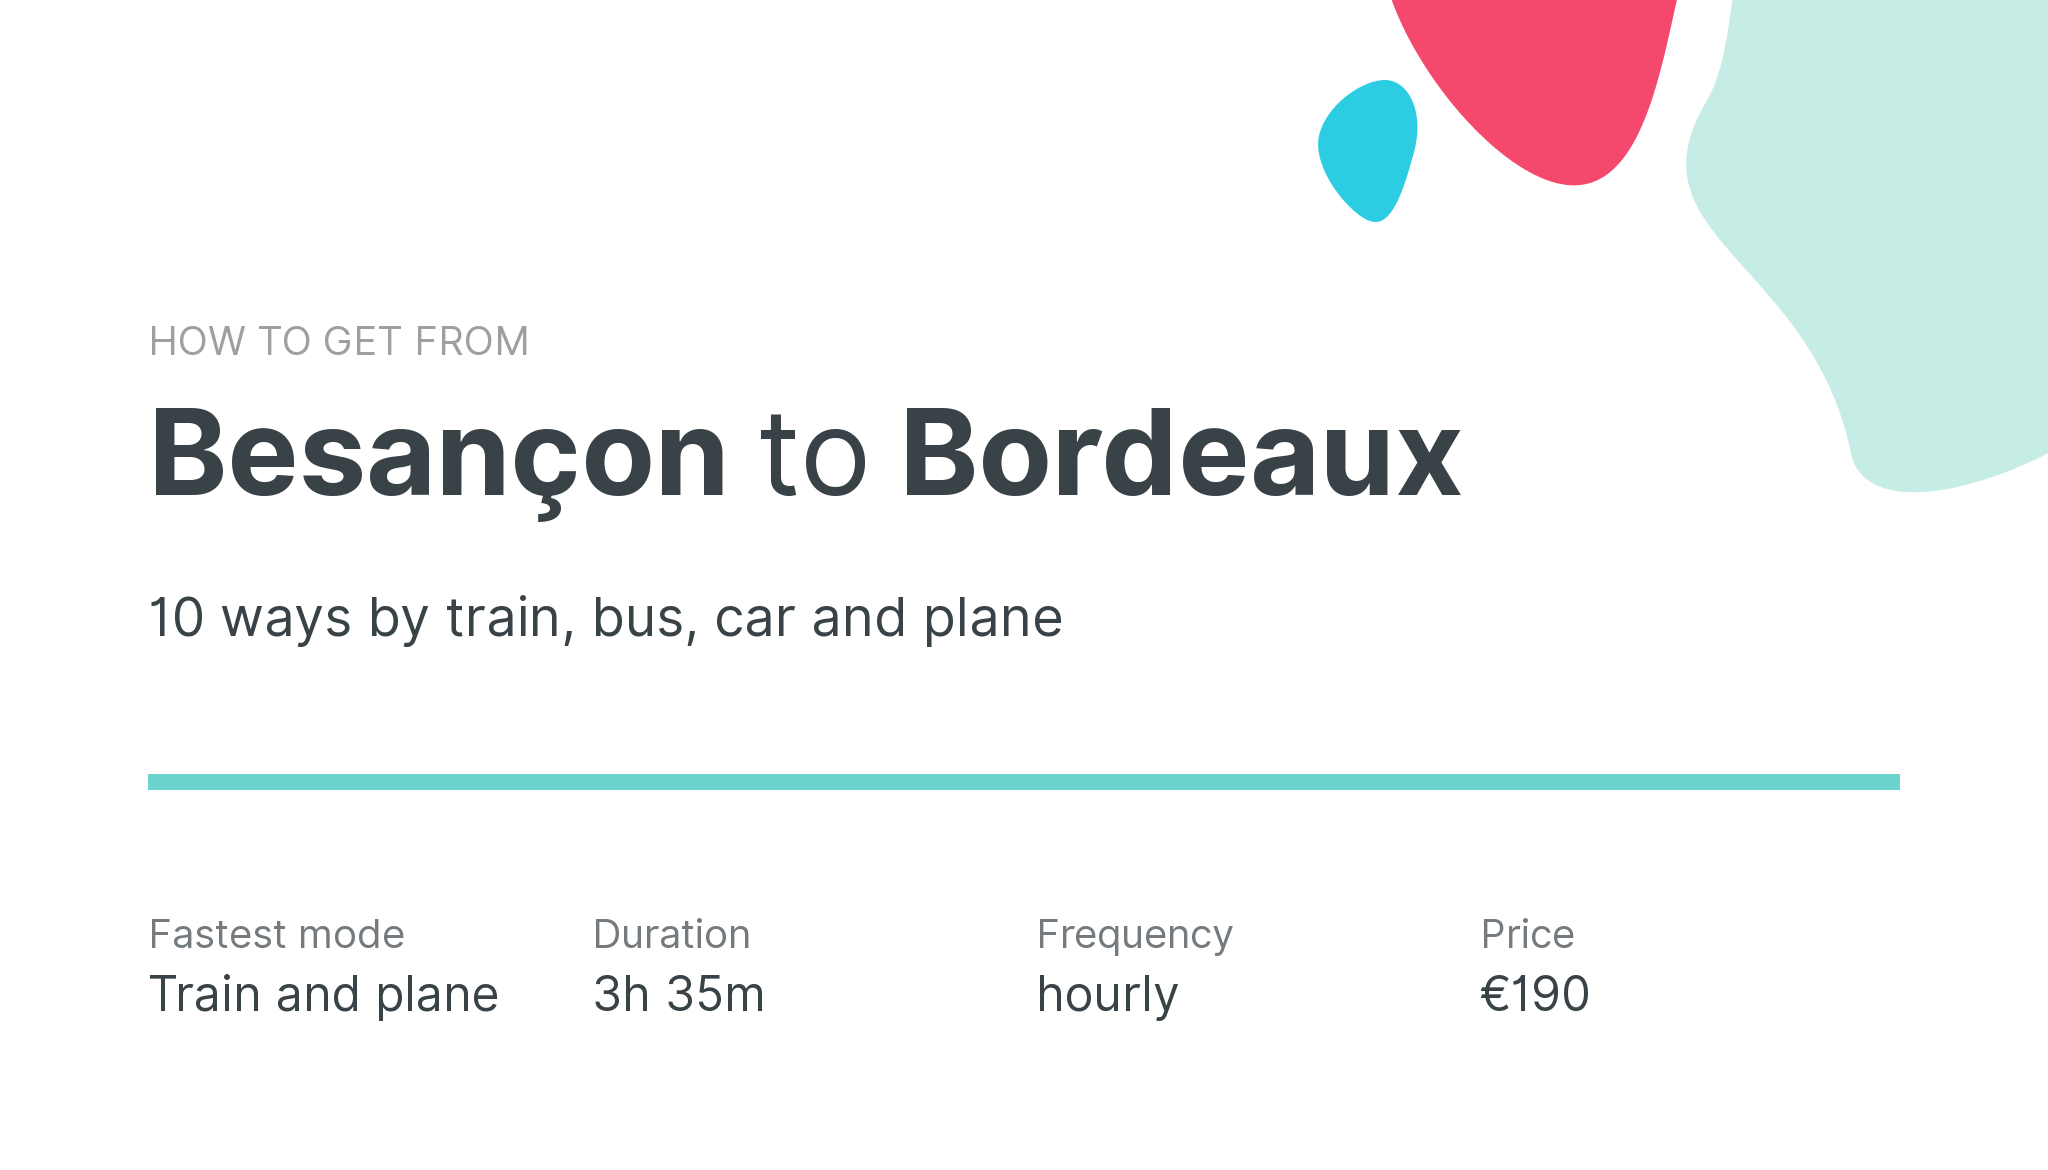 How do I get from Besançon to Bordeaux